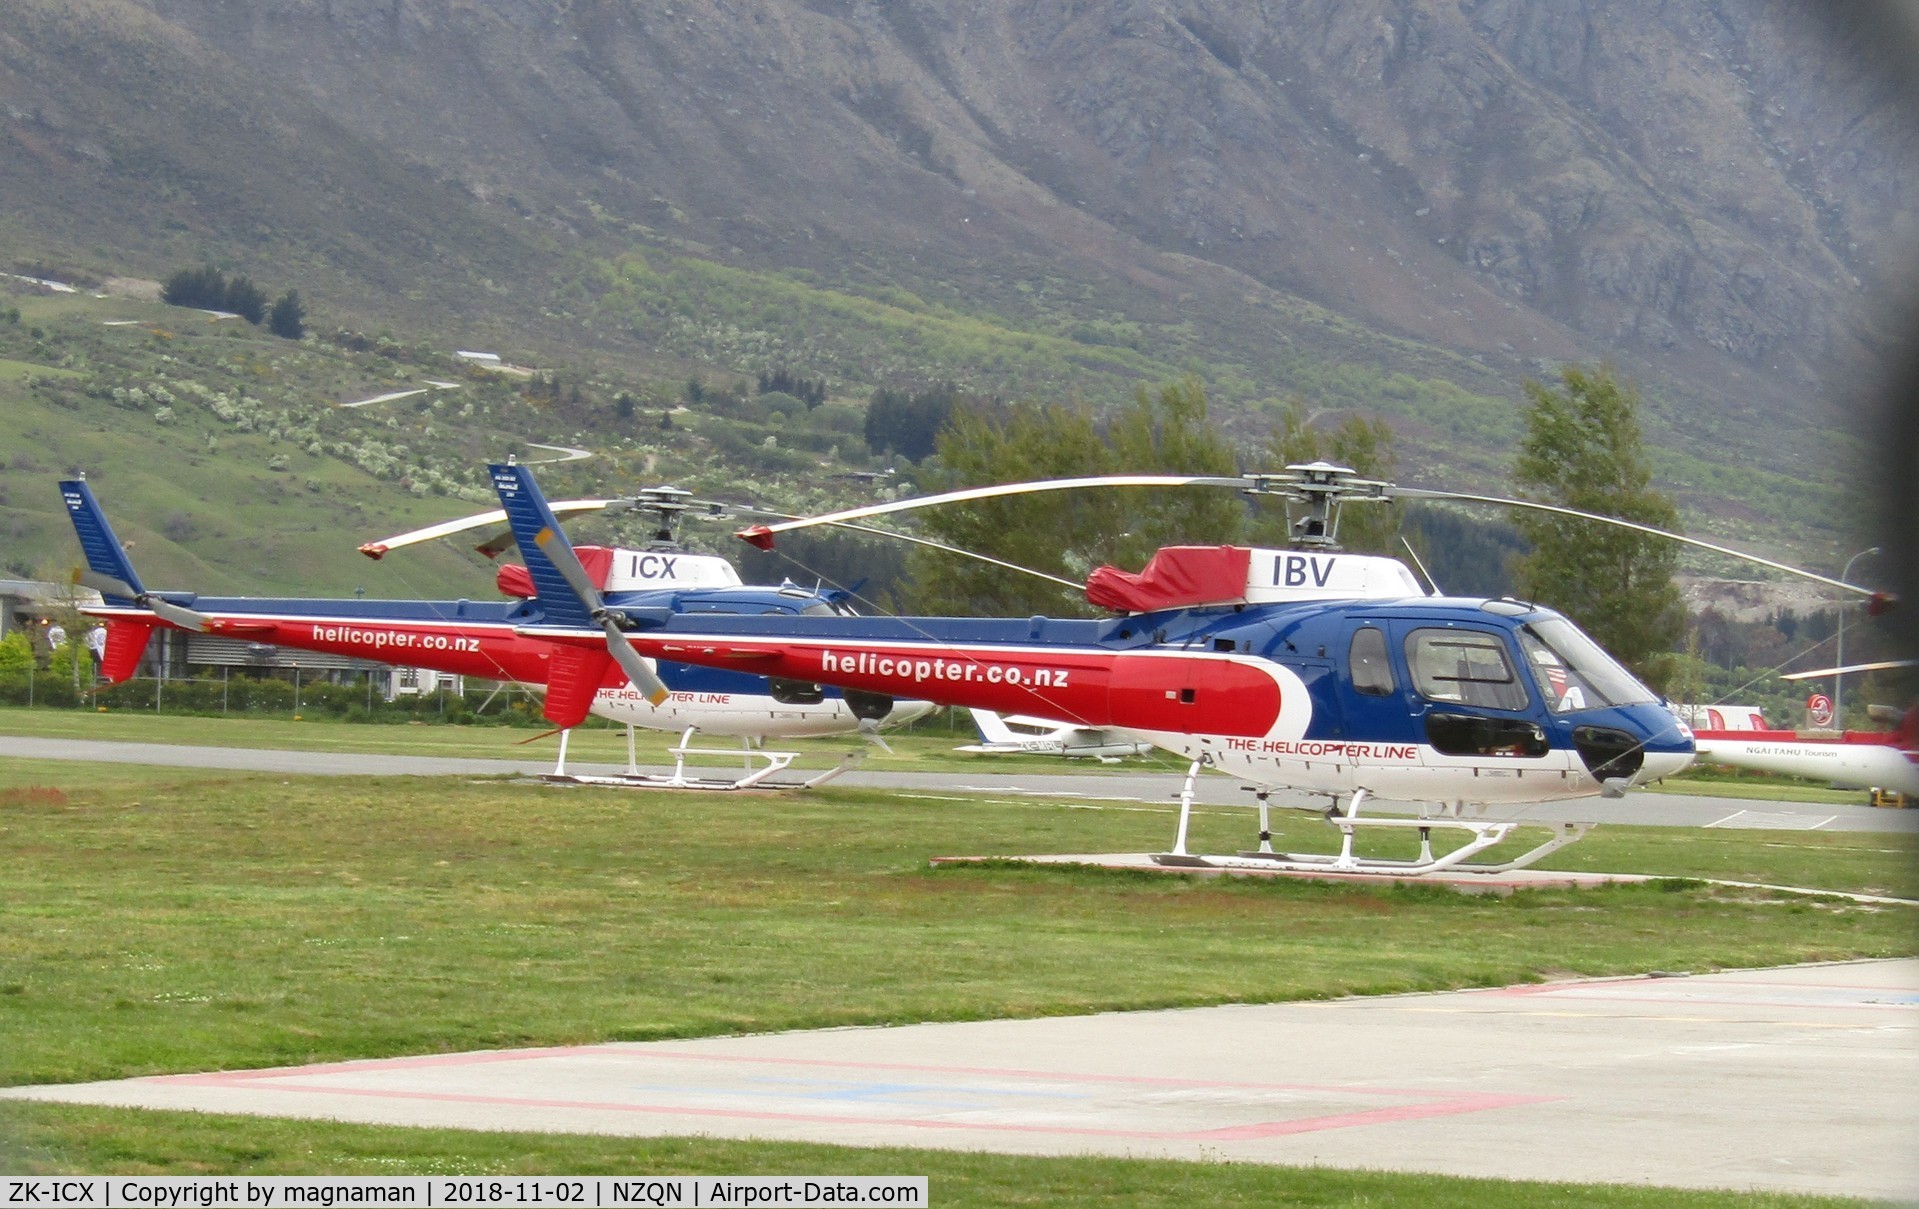 ZK-ICX, 2005 Eurocopter AS-350B-2 Ecureuil Ecureuil C/N 3969, along with one of sister ships at queenstown